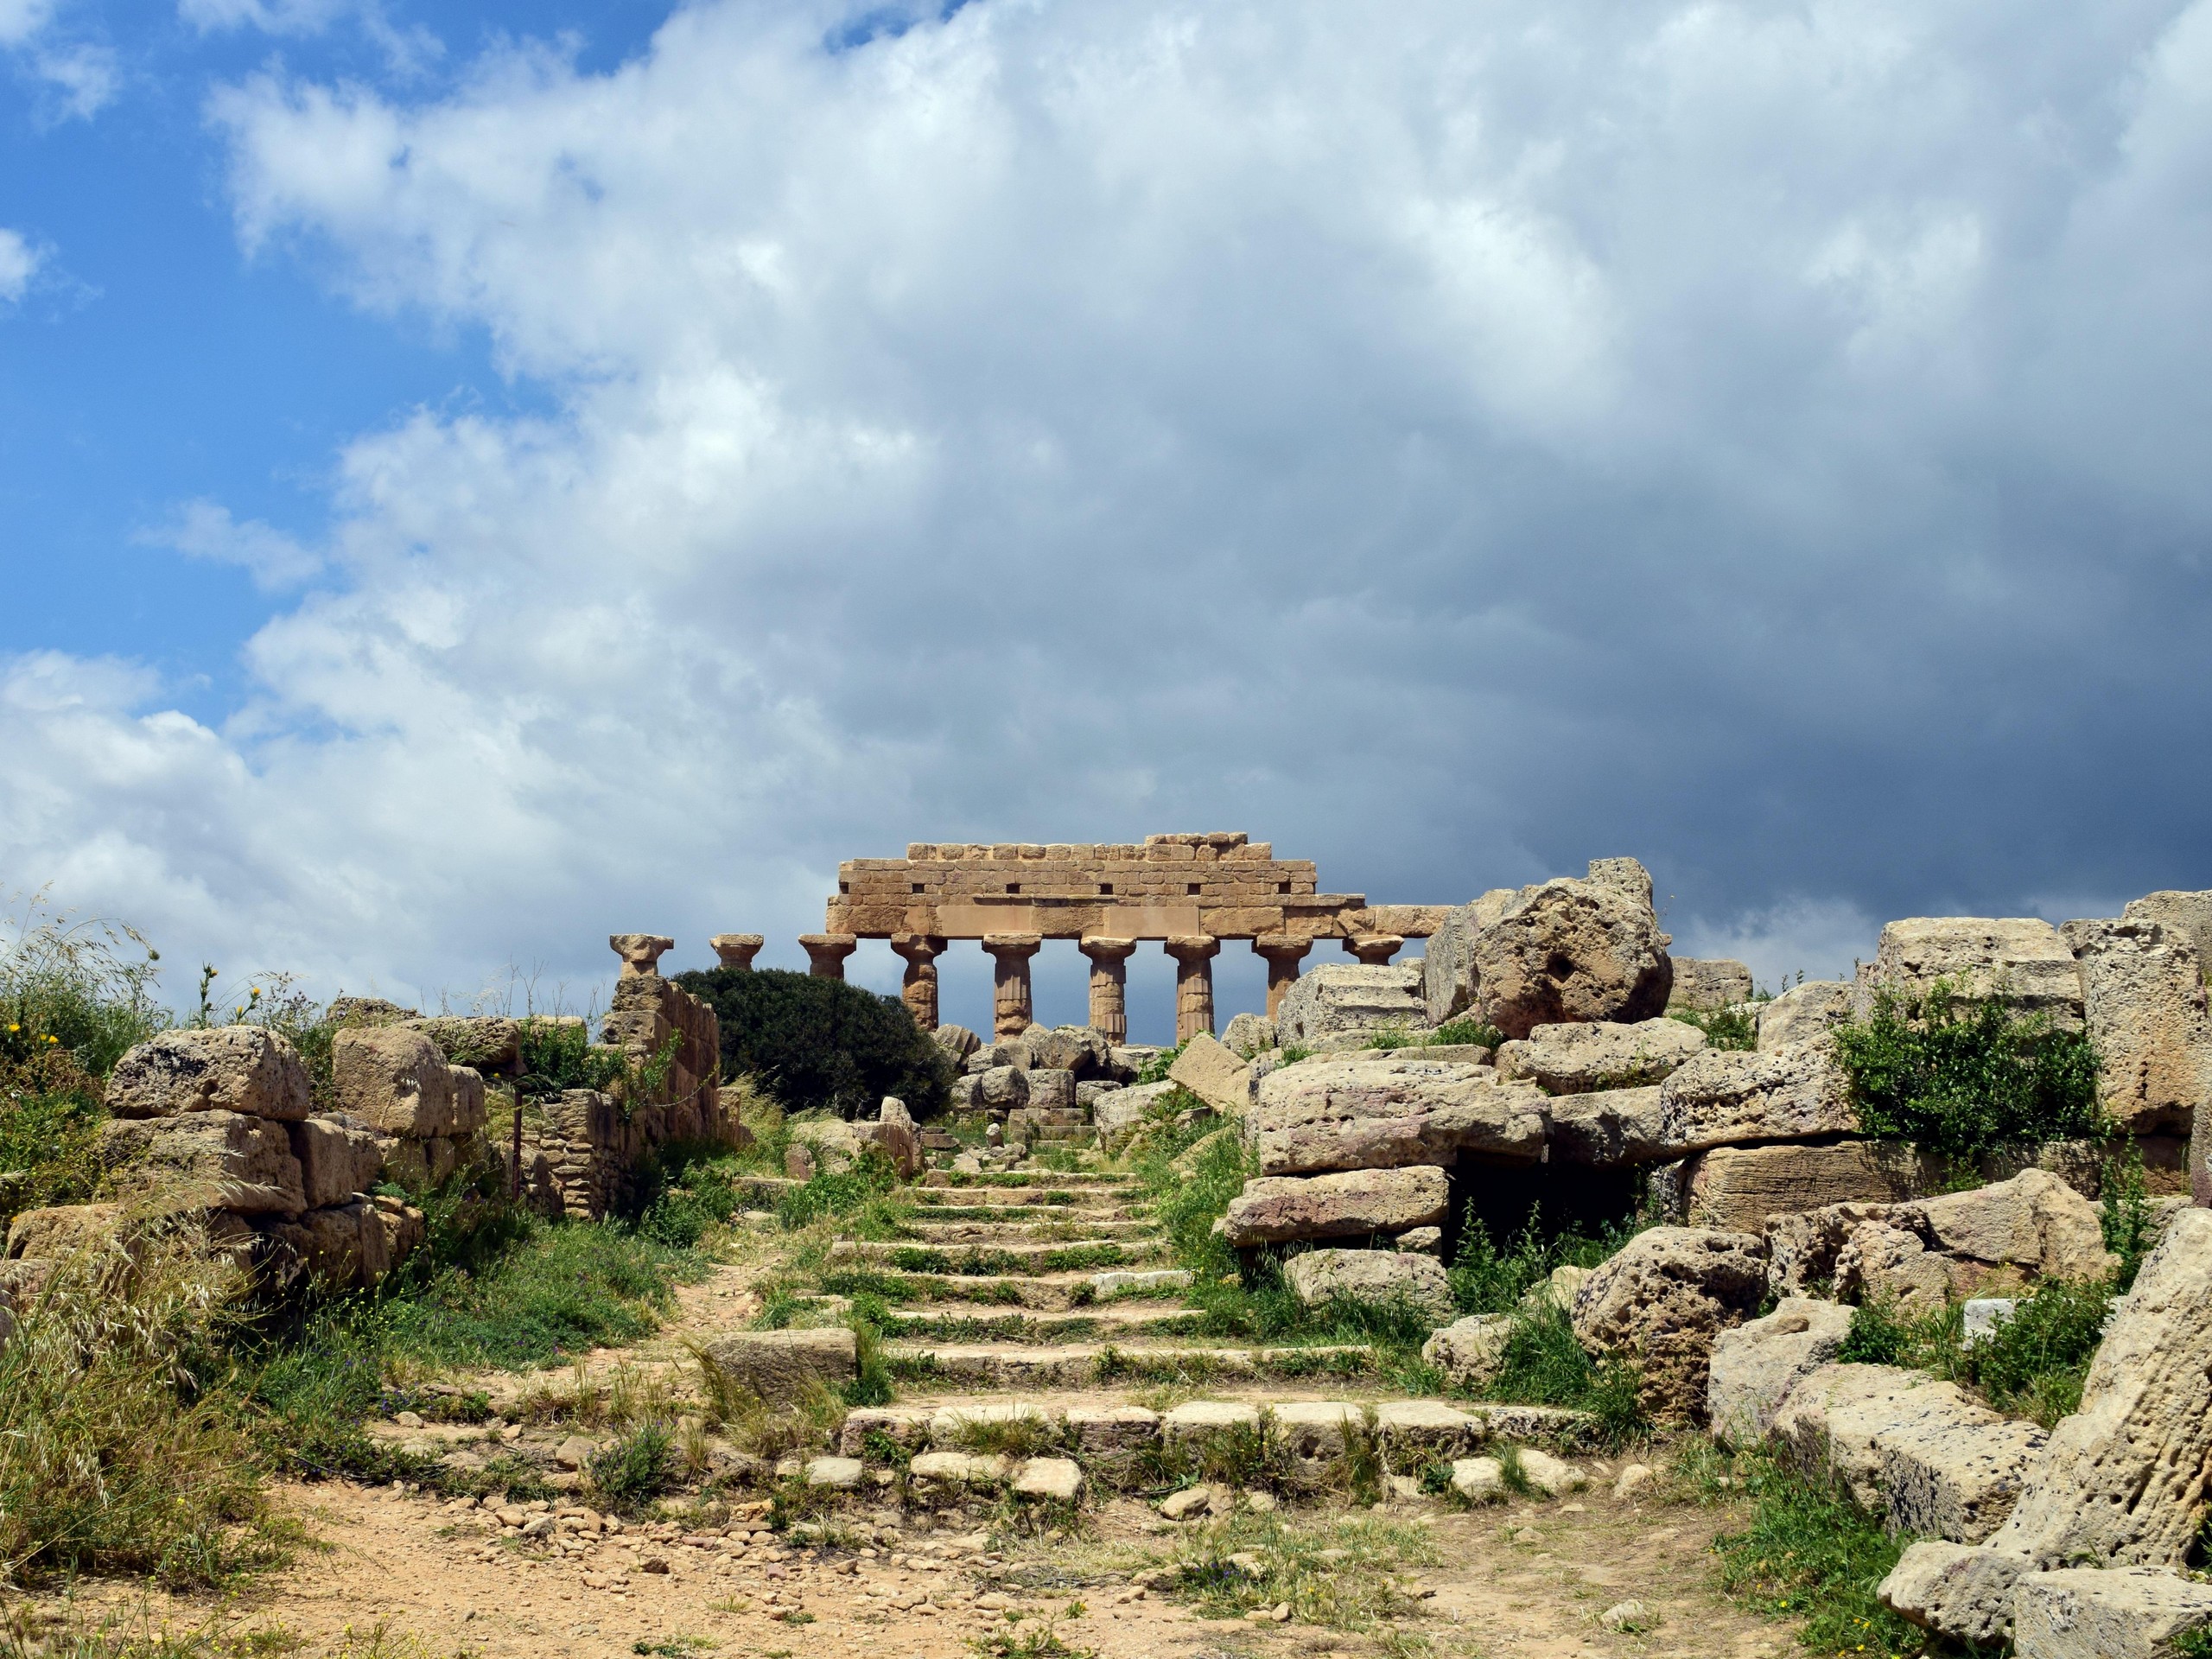 Approaching the old temple ruins in Sicily, Italy